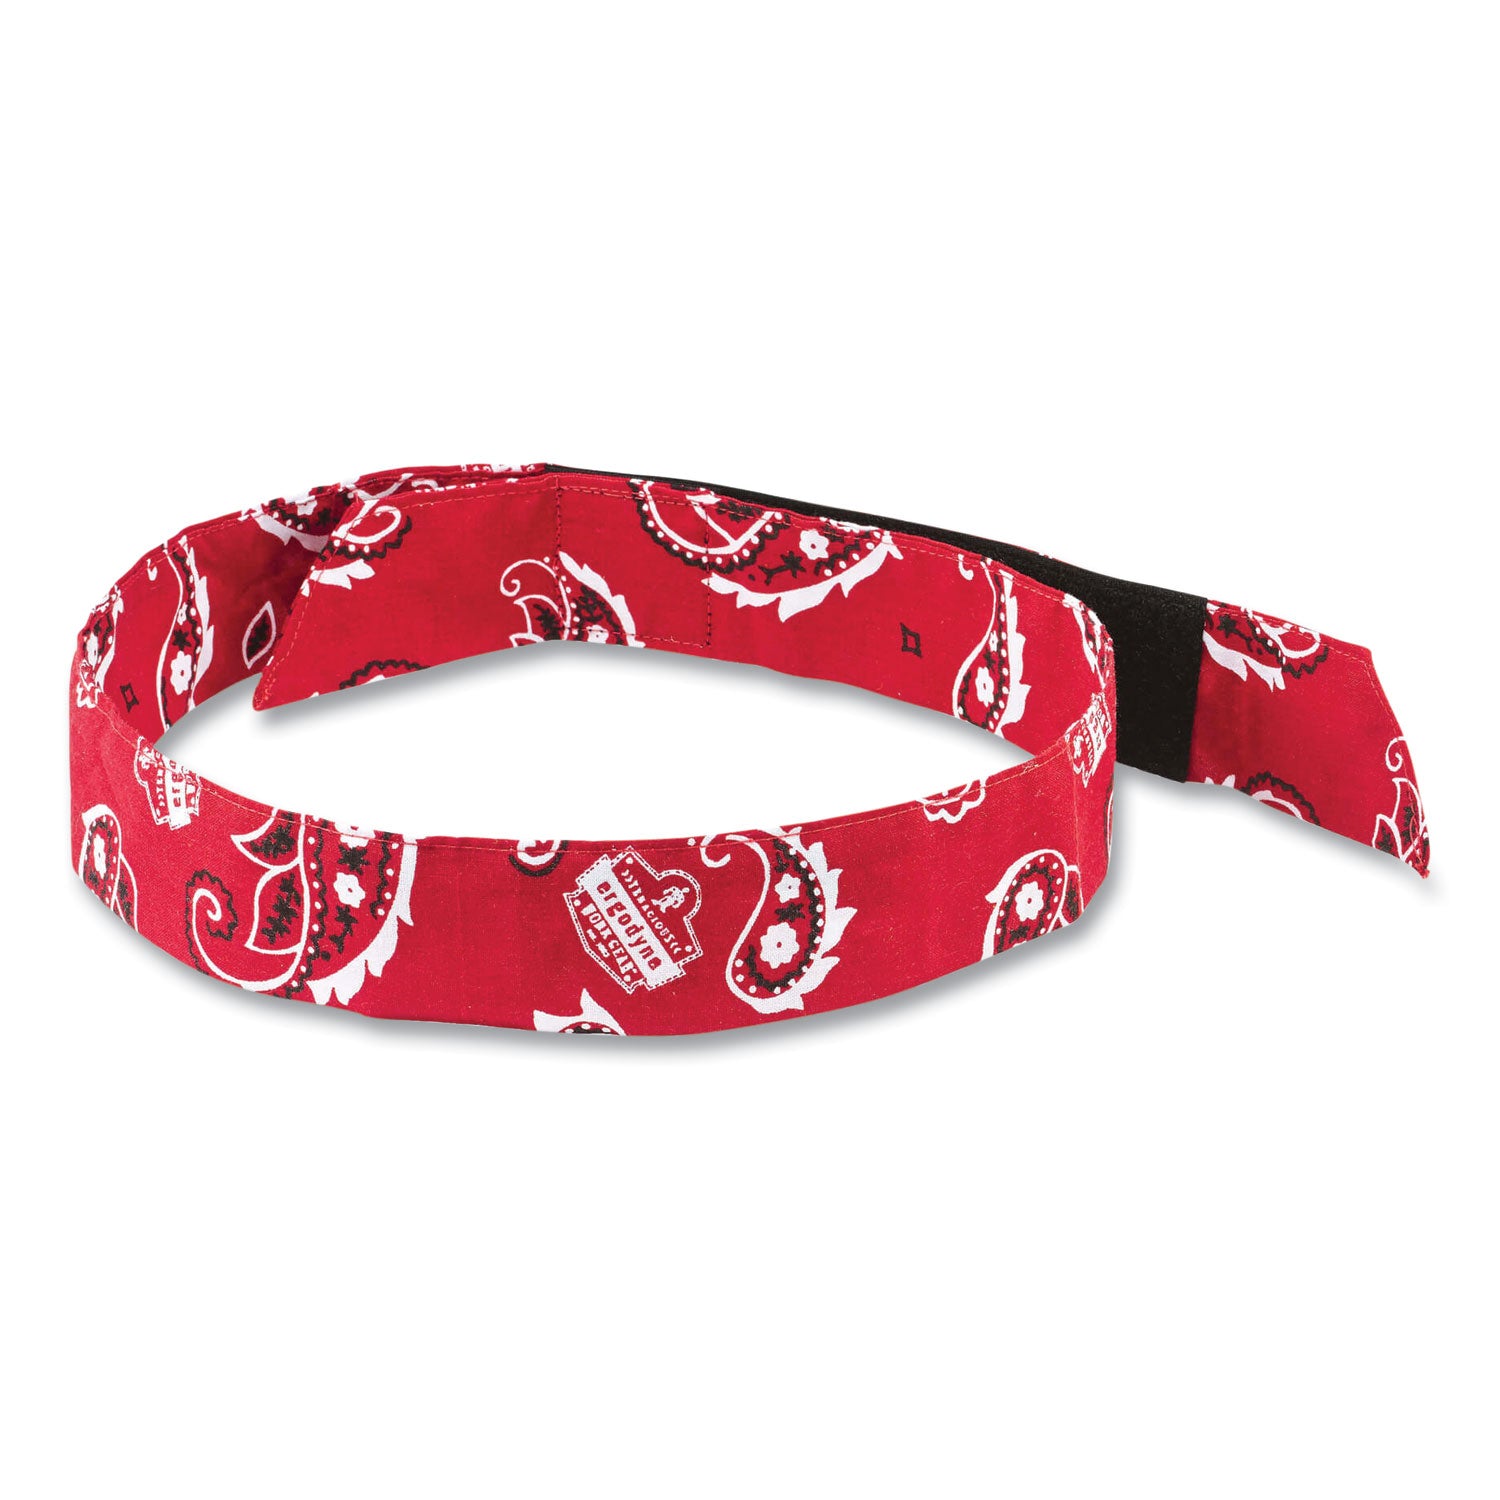 chill-its-6705-cooling-embedded-polymers-hook-and-loop-bandana-headband-one-size-red-western-ships-in-1-3-business-days_ego12315 - 1